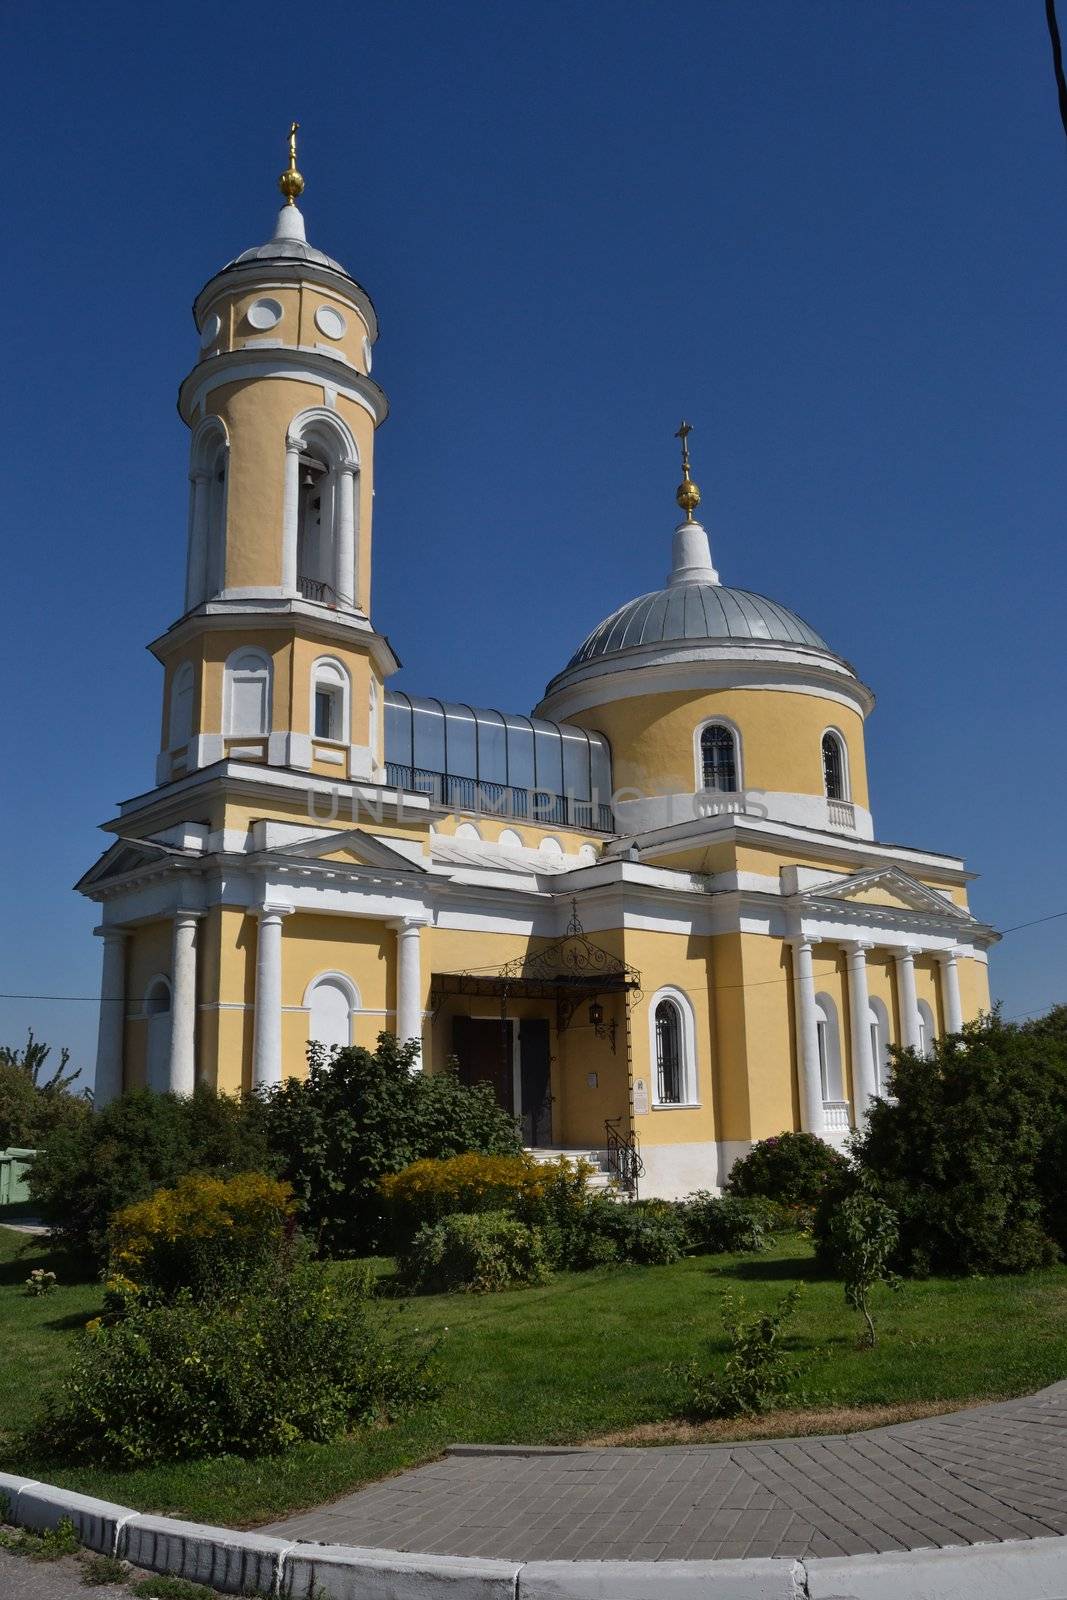 The frontal view of some of the churches of Russian city Kolomna (near Moscow)